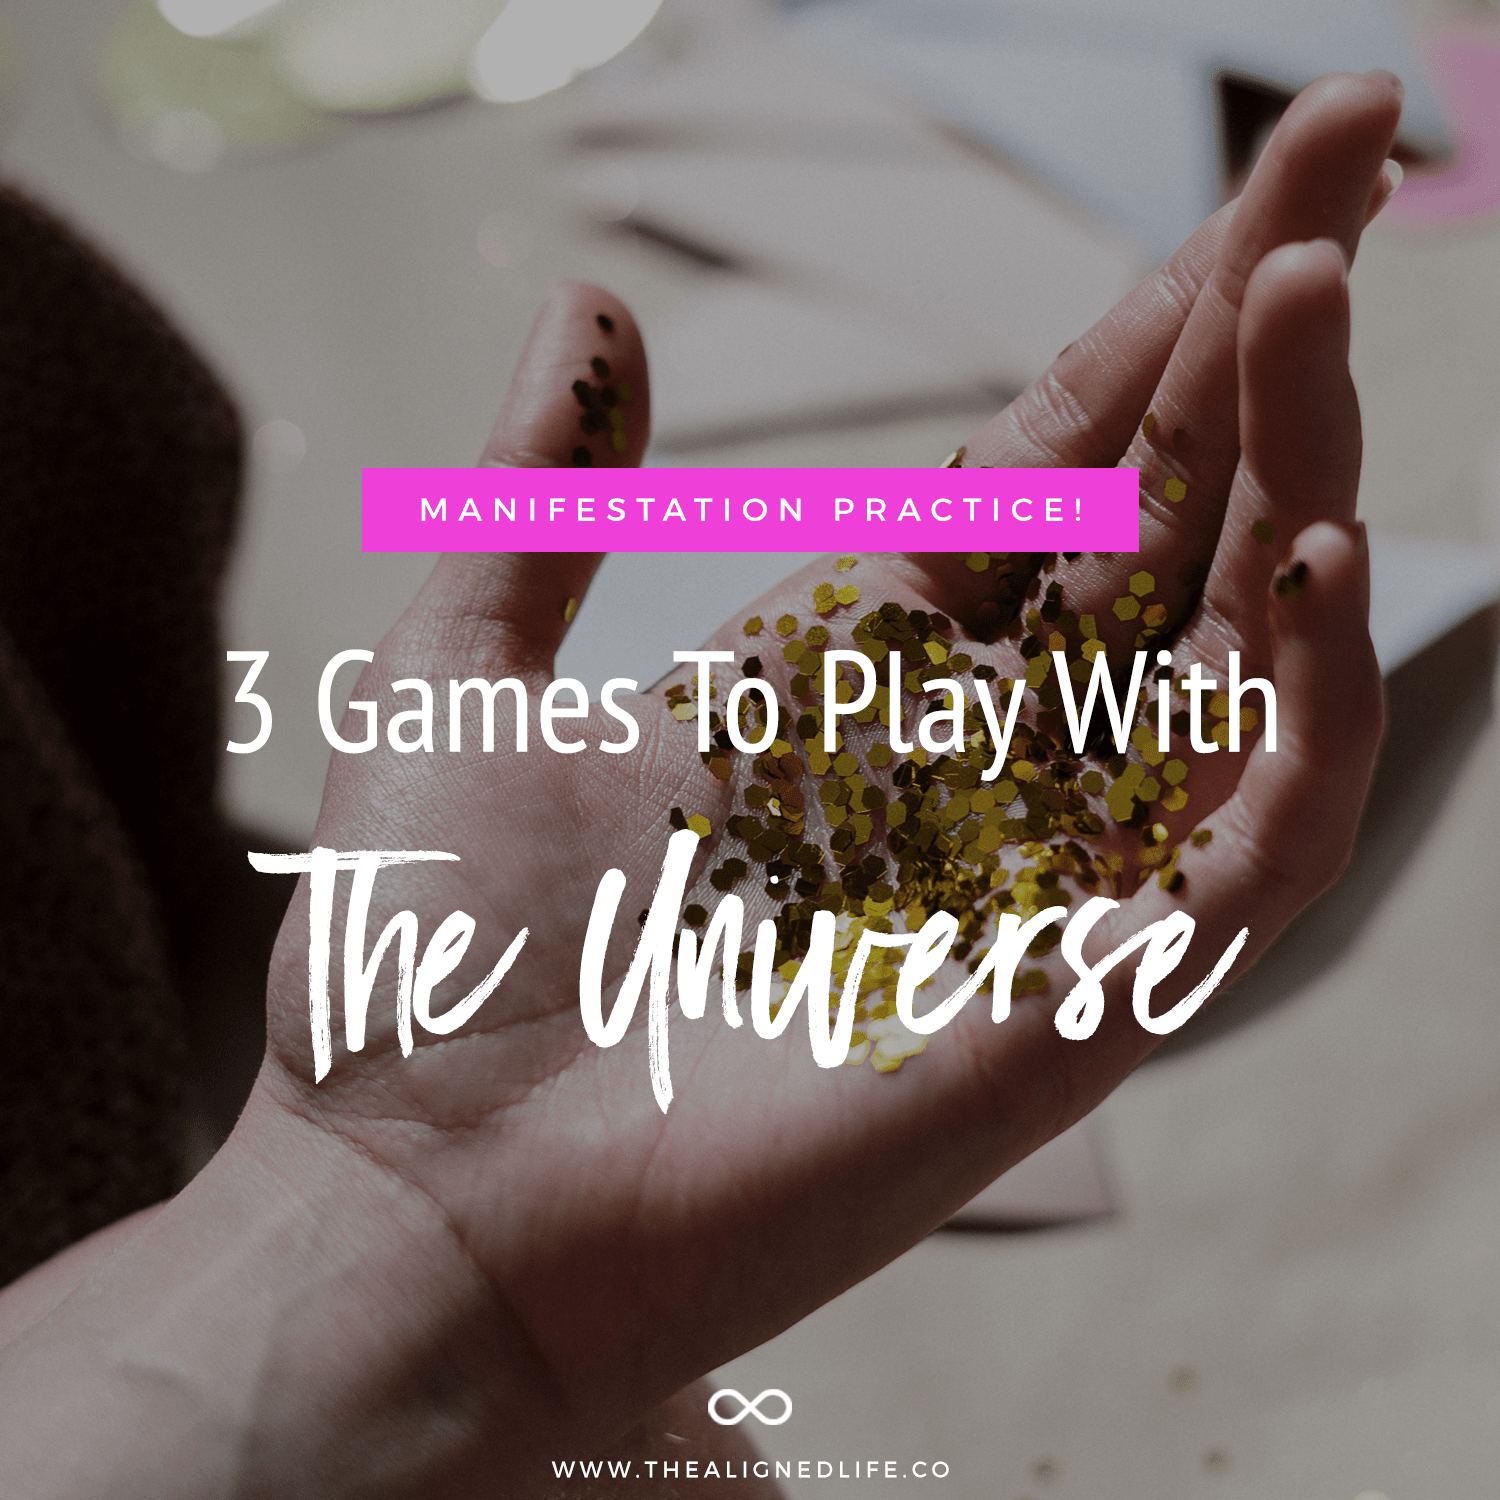 Manifestation Practice: 3 Games You Can Play With The Universe